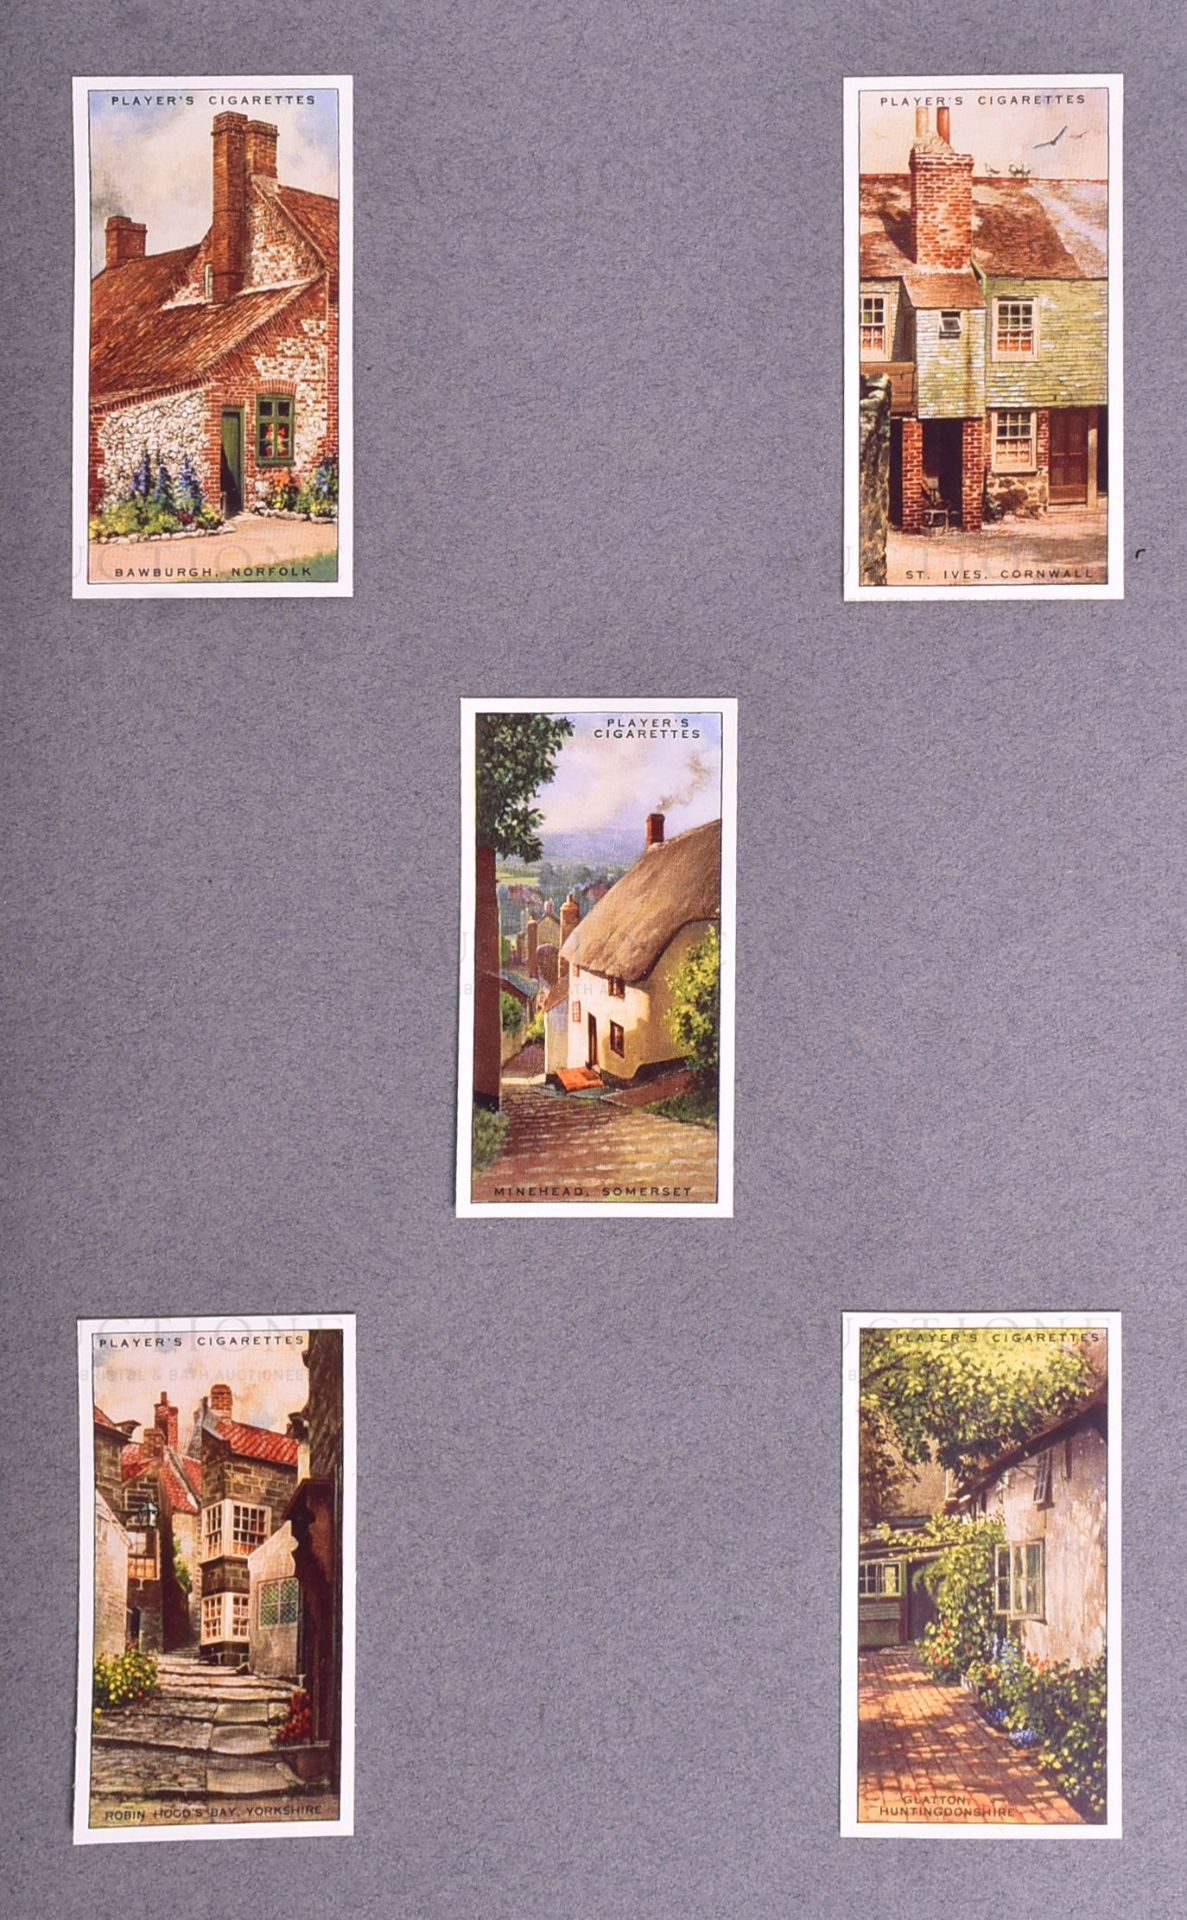 PLAYER'S - COTTAGE ARCHITECTURE (1946) - ORIGINAL PRINTER PROOFS - Image 6 of 7